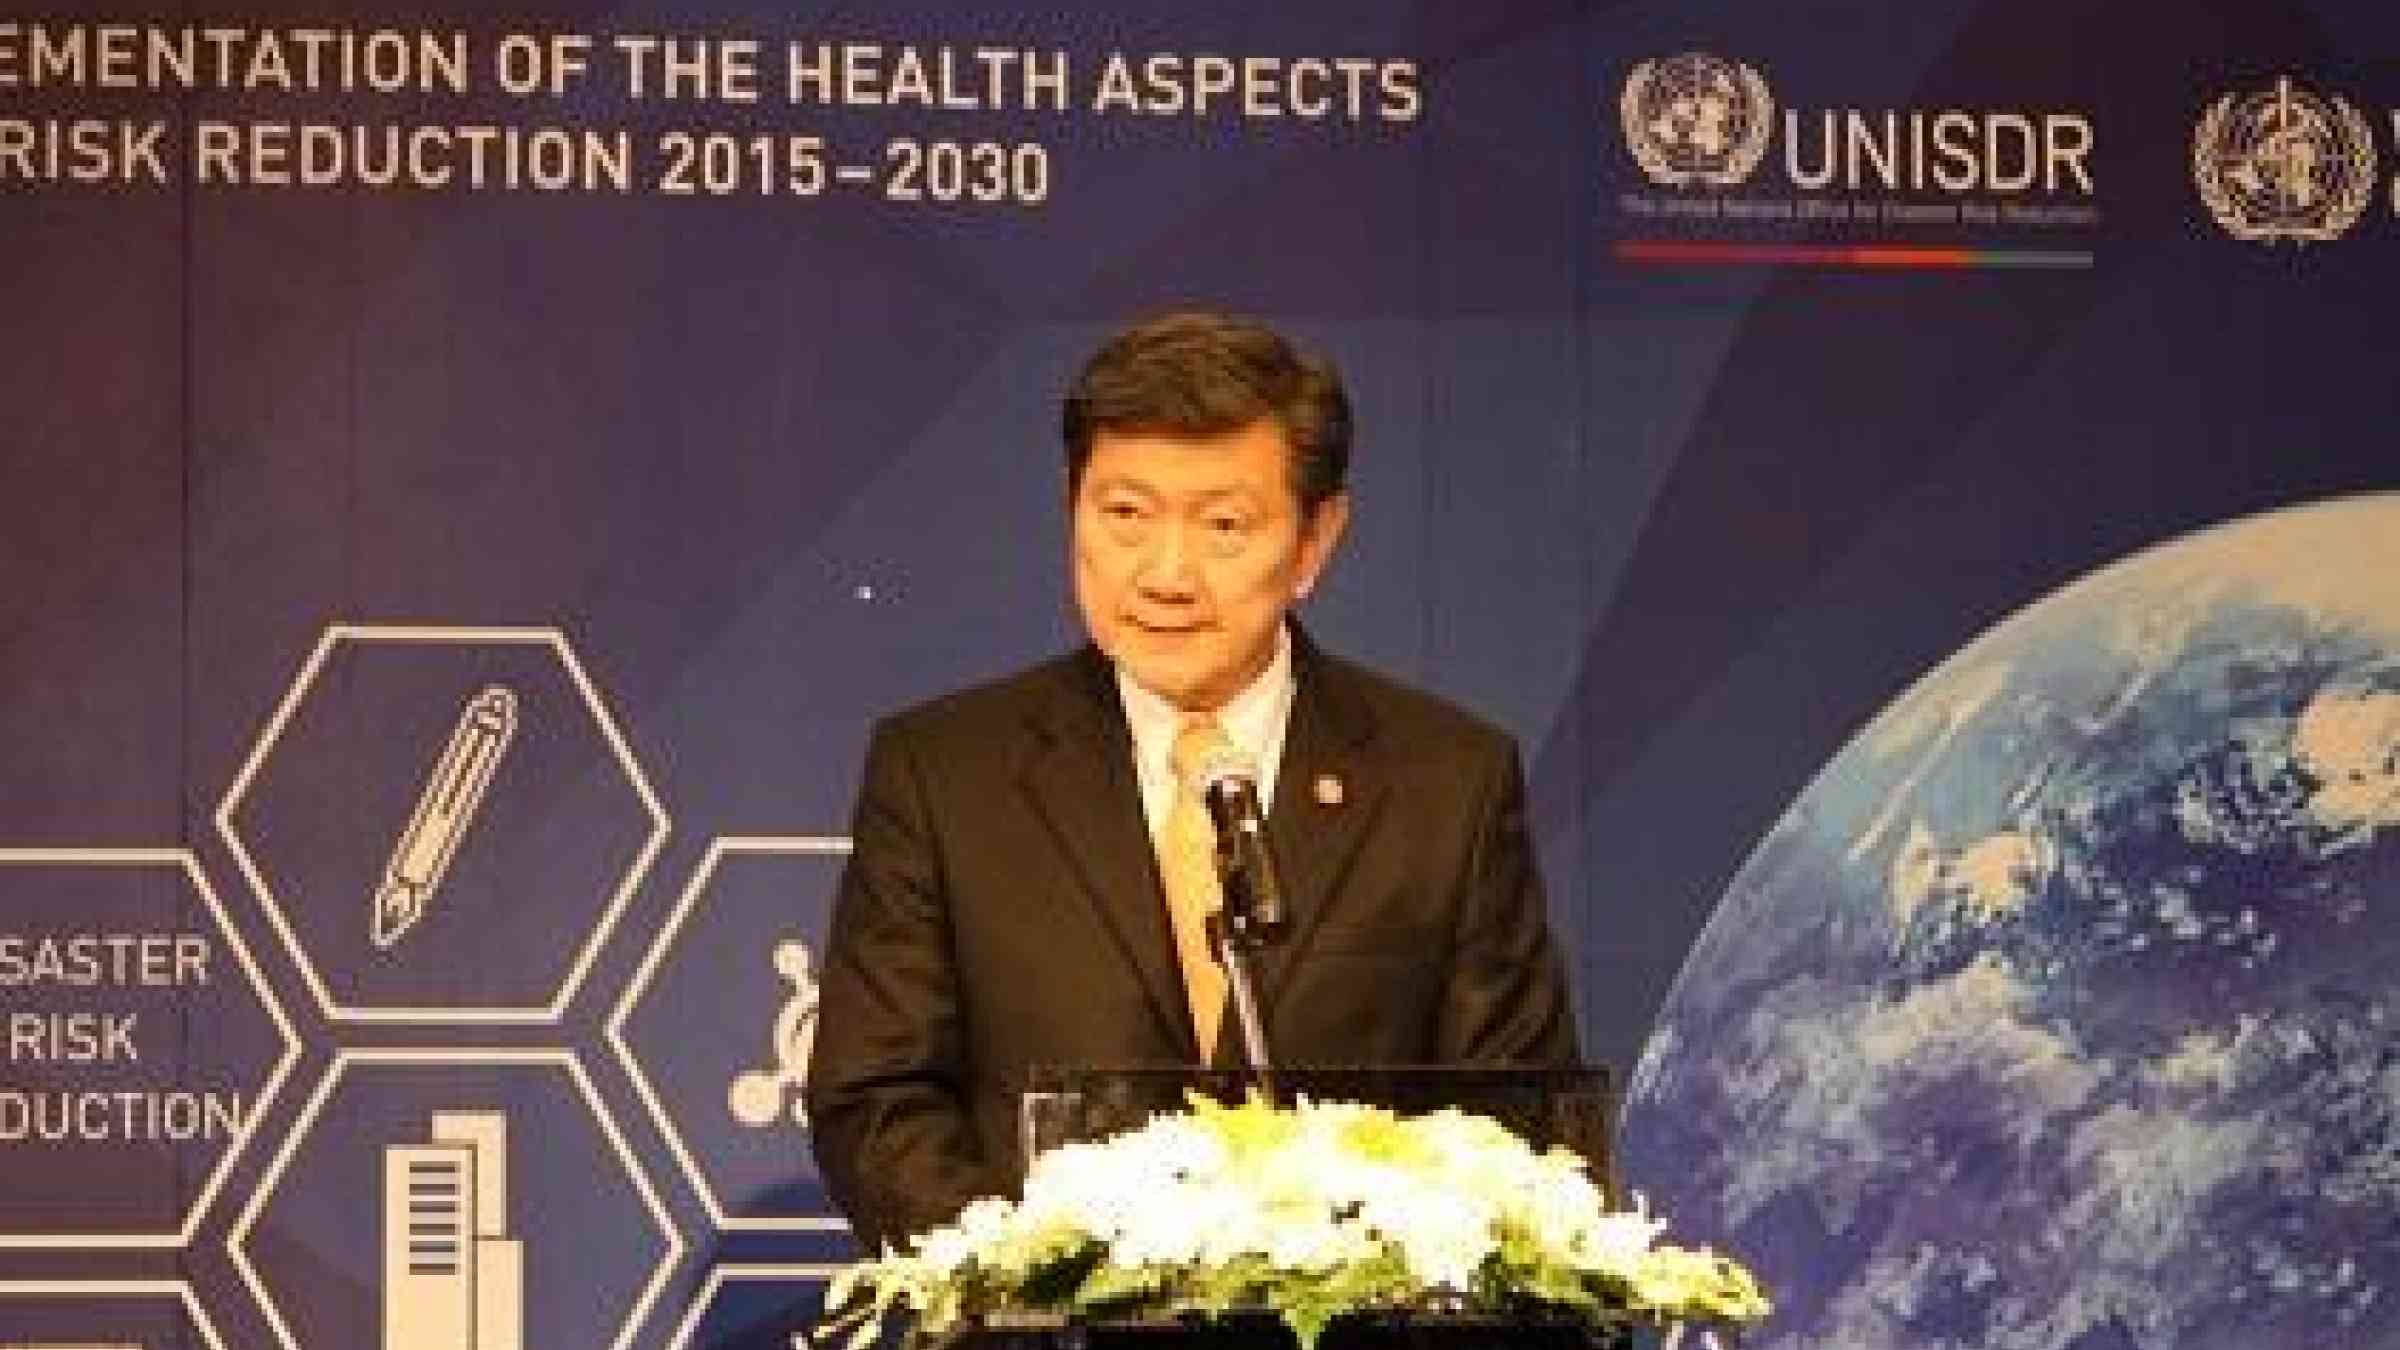 Thailand's Minister of Public Health, H.E. Clin. Prof. Emeritus Piyasakol Sakolsatayadorn said the International Conference was about identifying opportunities to integrate health in disaster risk reduction. (Photo: UNISDR)